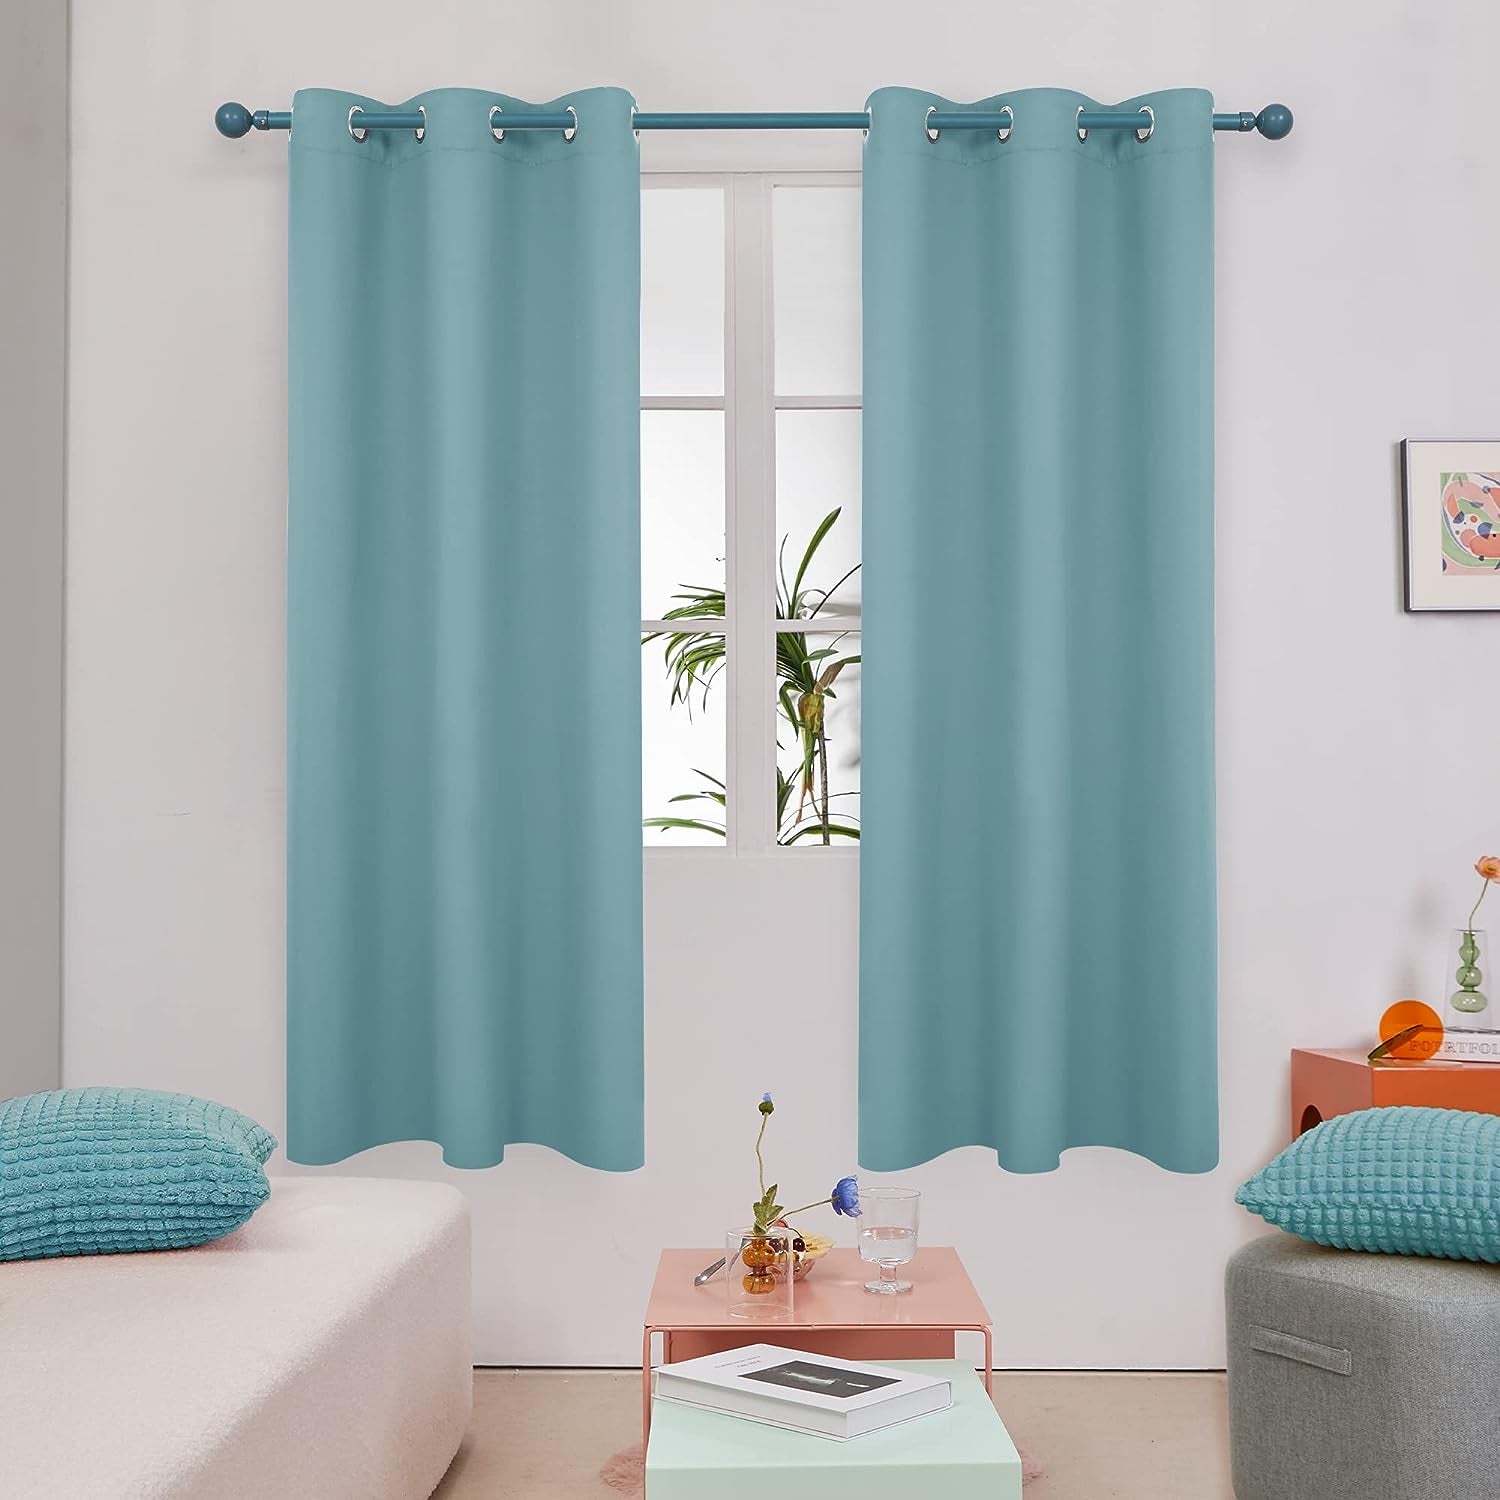 Deconovo 100% Blackout Curtains Room Darkening Thermal Insulated Blackout Grommet Window Curtain for Living Room,Black,42X120-Inch,1 Panel  Deconovo Light Blue 42X63 Inch 